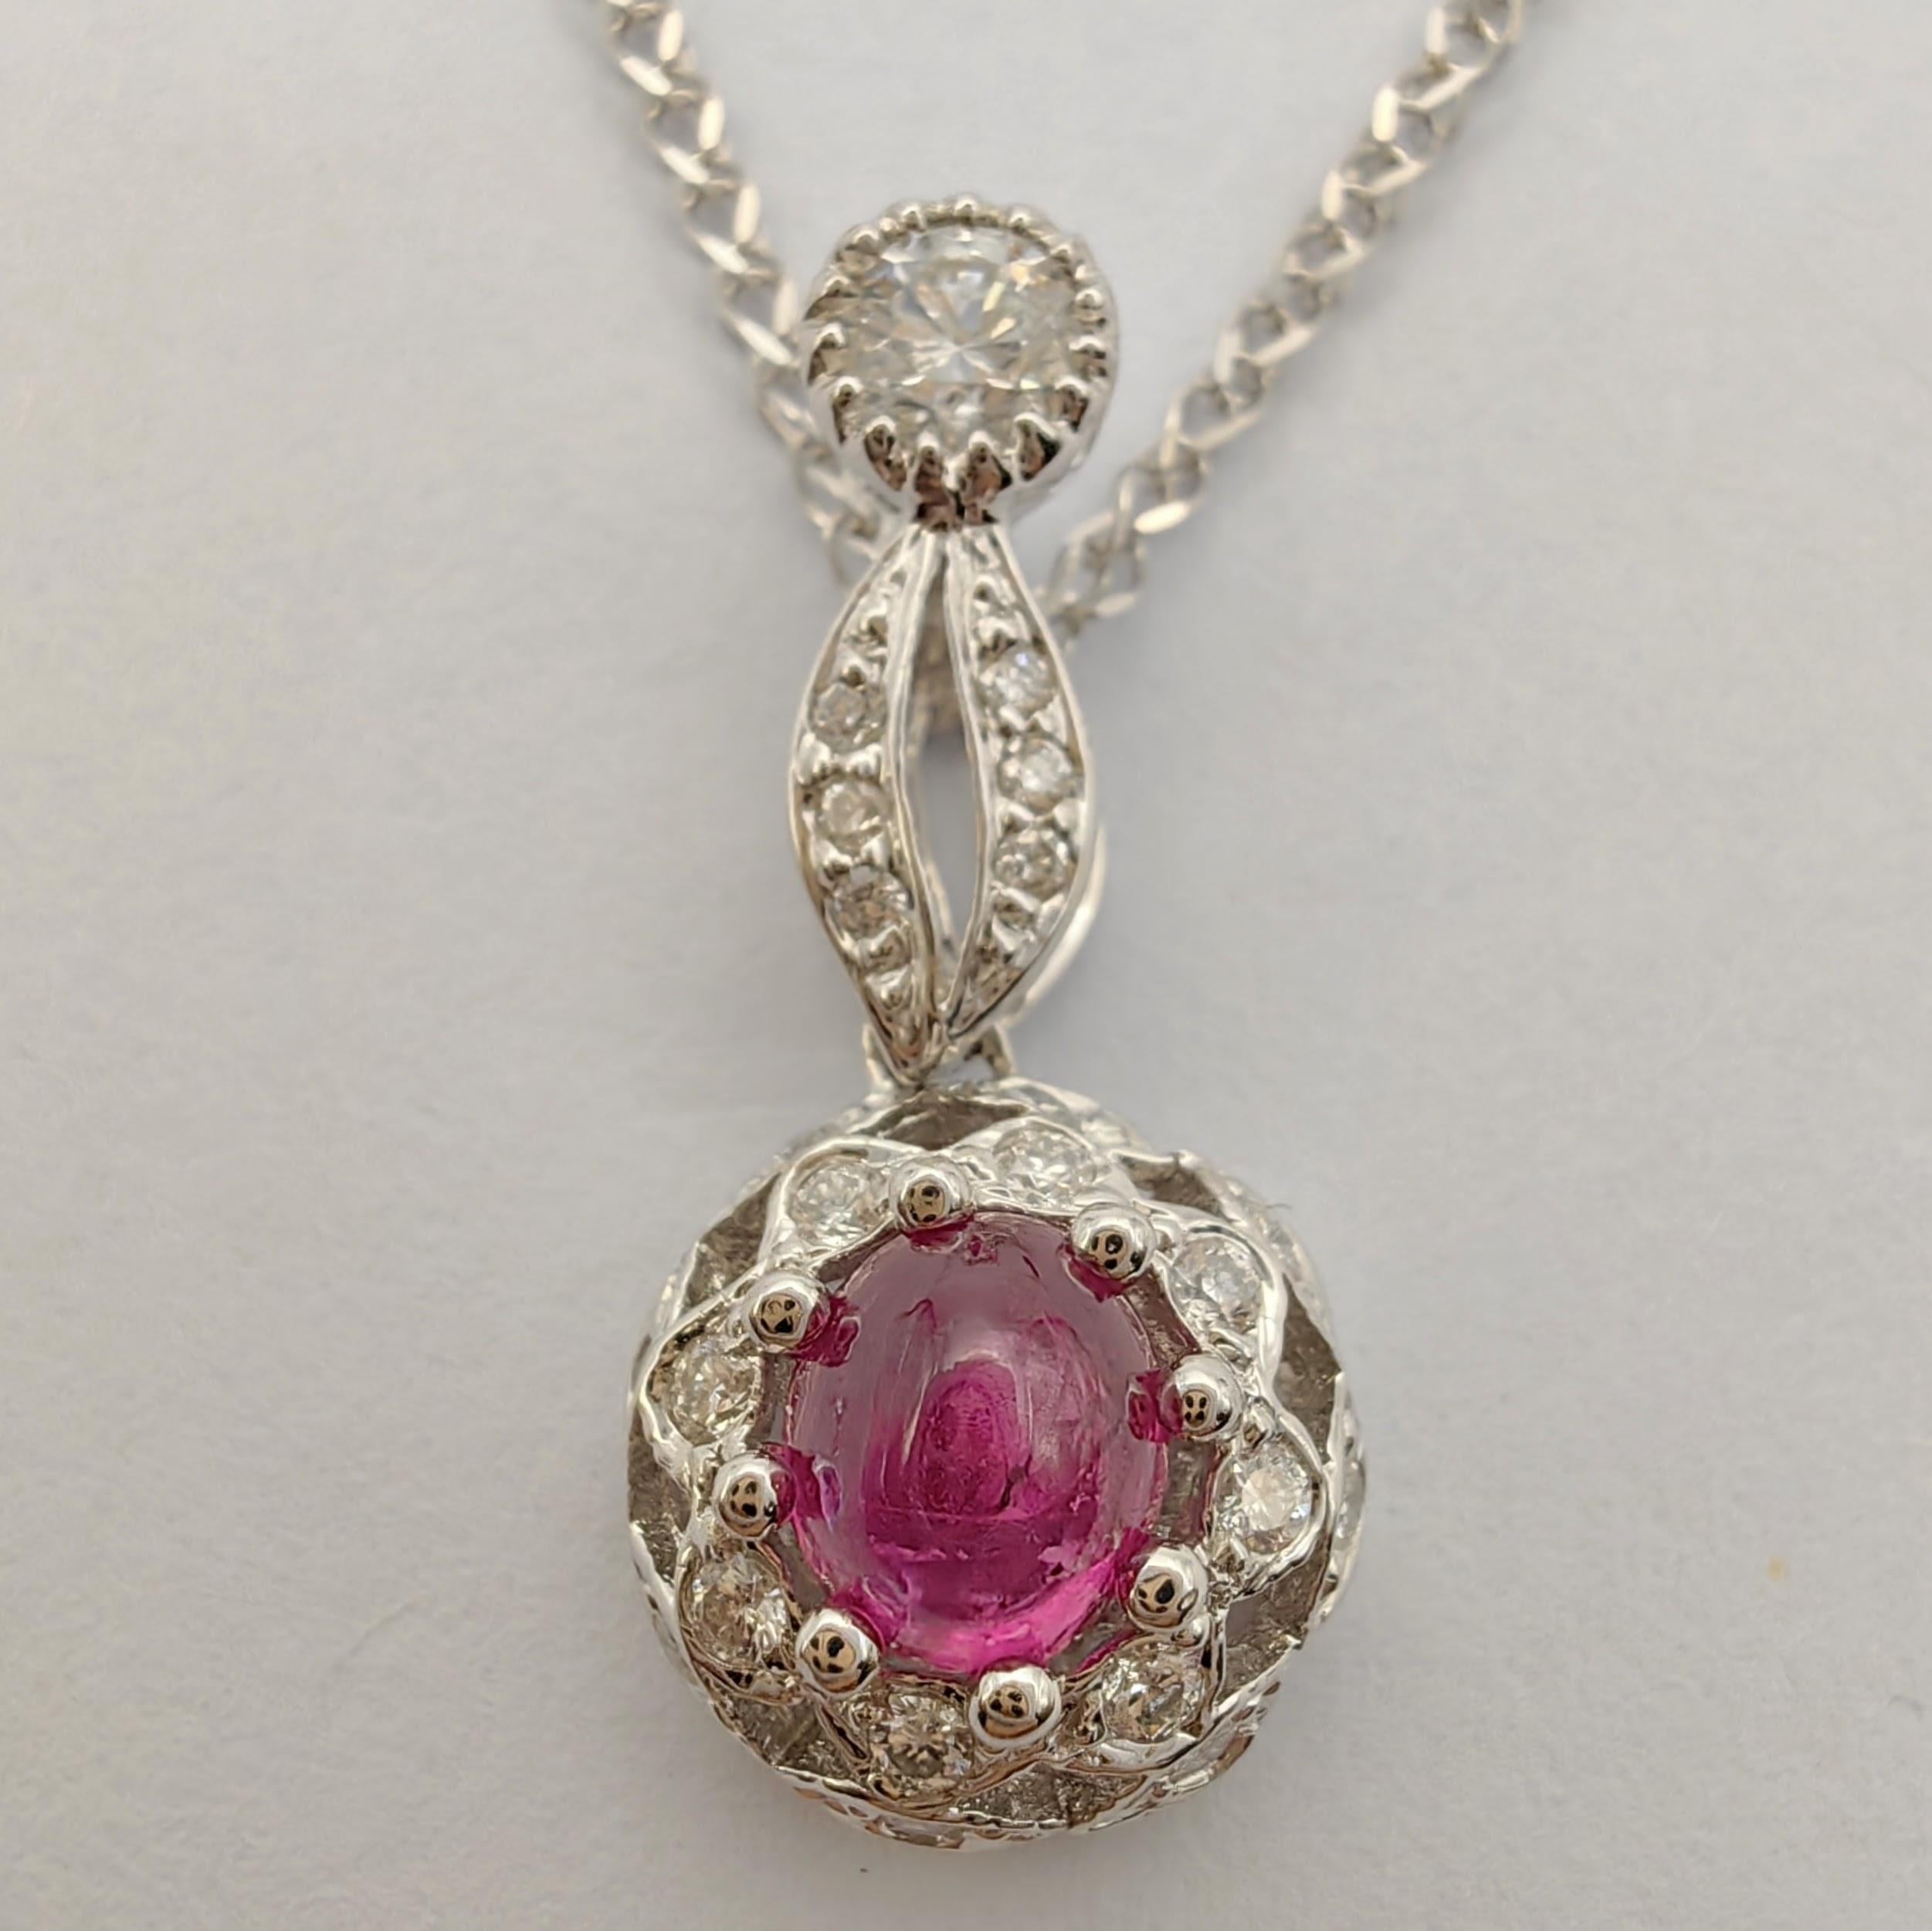 Introducing our exquisite Cabochon Ruby & Diamond Double Halo Necklace Pendant in 18K White Gold – a mesmerizing blend of vintage charm and contemporary elegance.

At the heart of this pendant lies a magnificent cabochon ruby, weighing 0.78 carats.